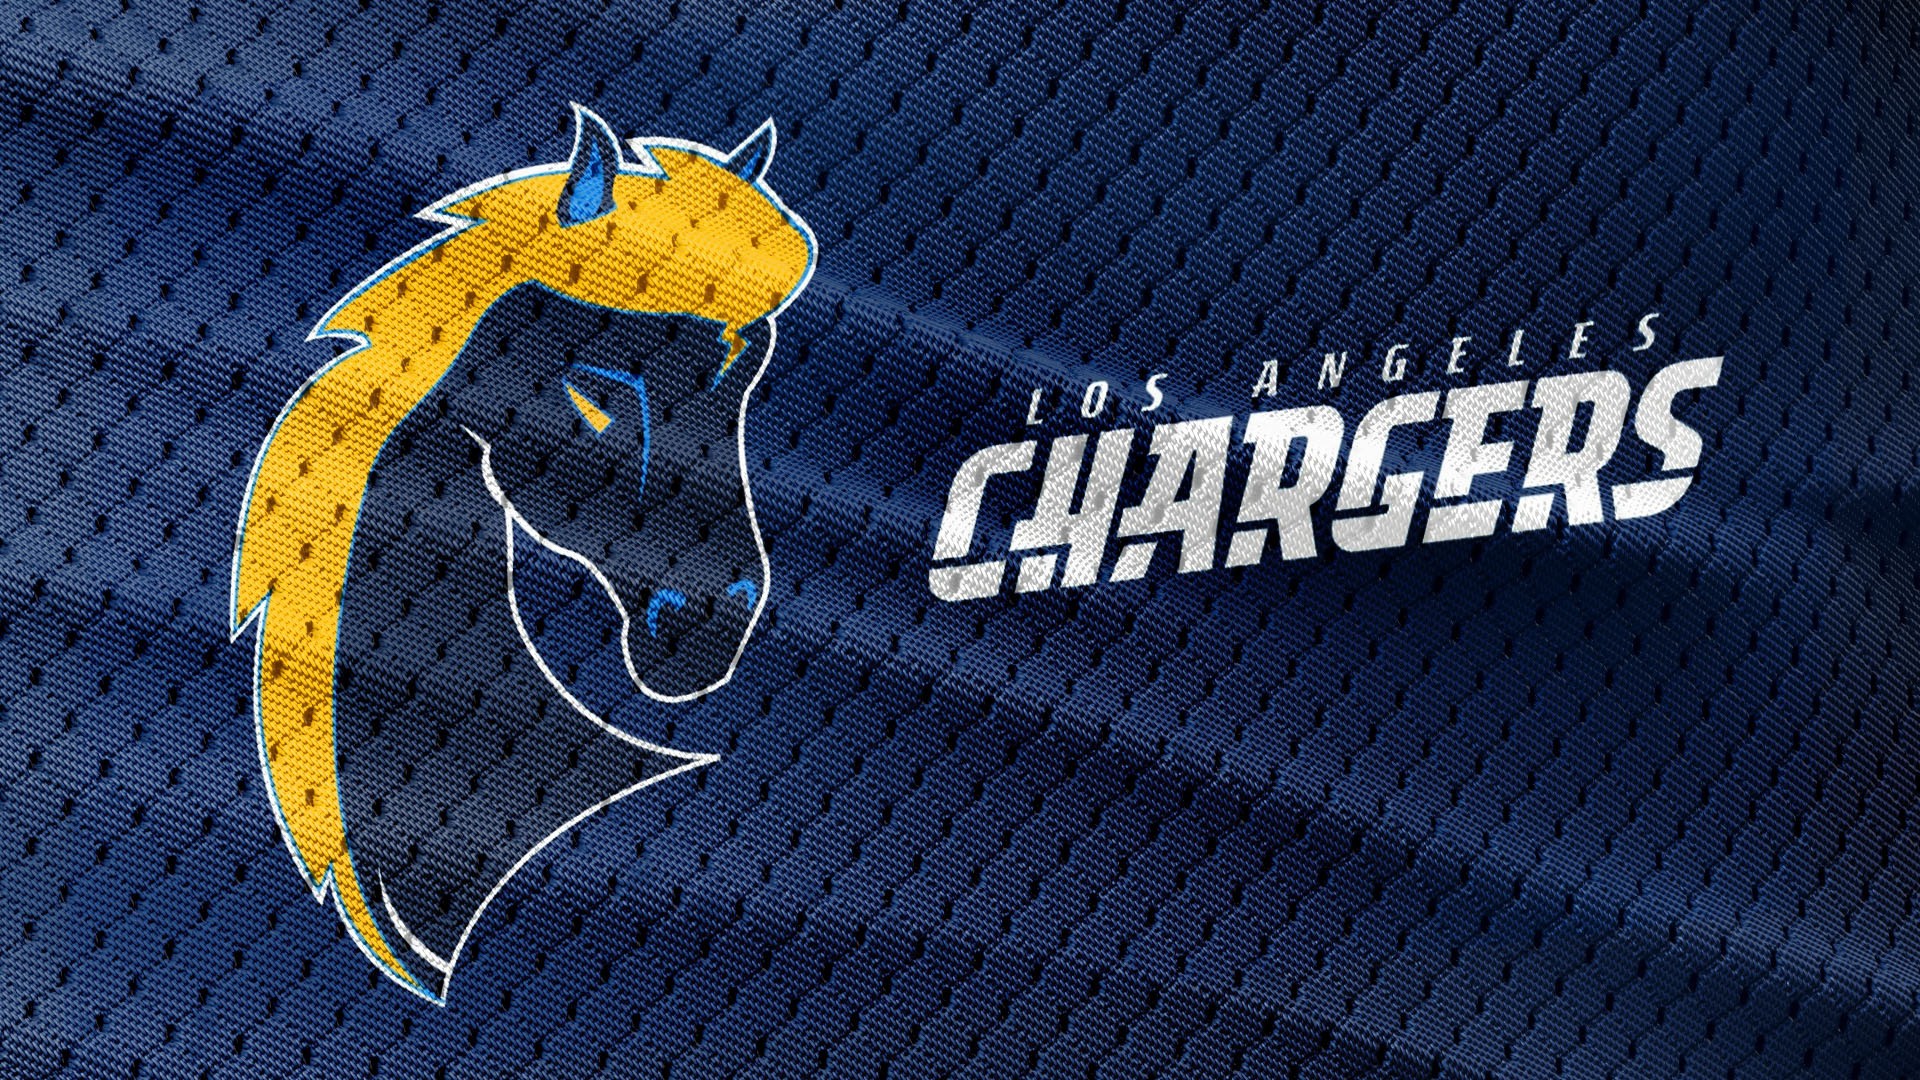 Los Angeles Chargers Mac Backgrounds with resolution 1920x1080 pixel. You can make this wallpaper for your Mac or Windows Desktop Background, iPhone, Android or Tablet and another Smartphone device